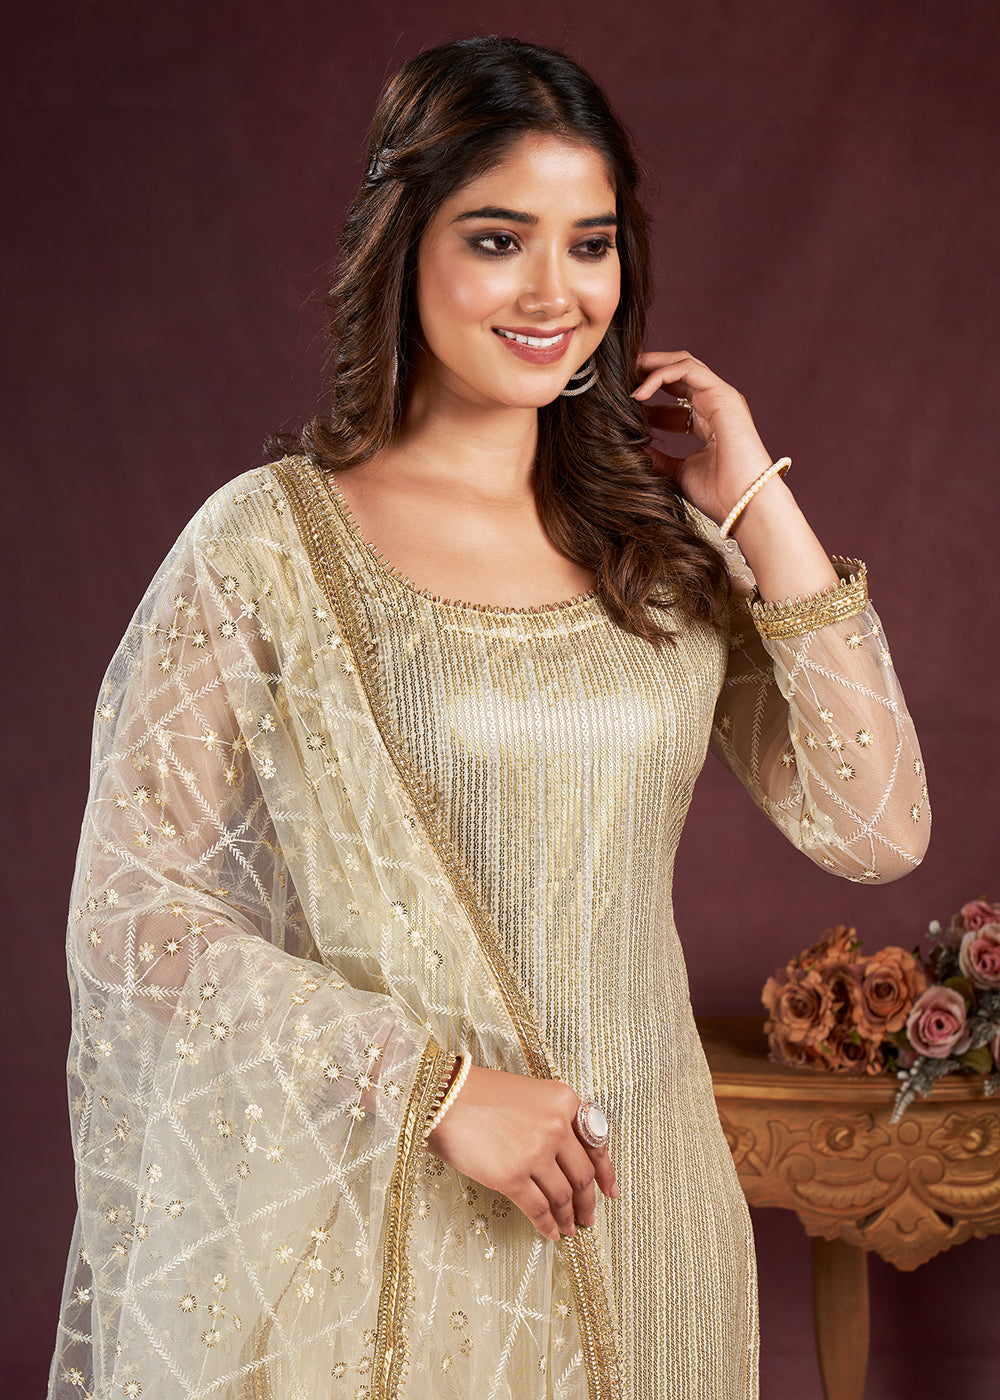 Buy Now White Butterfly Net Embroidered Festive Salwar Suit Online in USA, UK, Canada, Germany, Australia & Worldwide at Empress Clothing. 